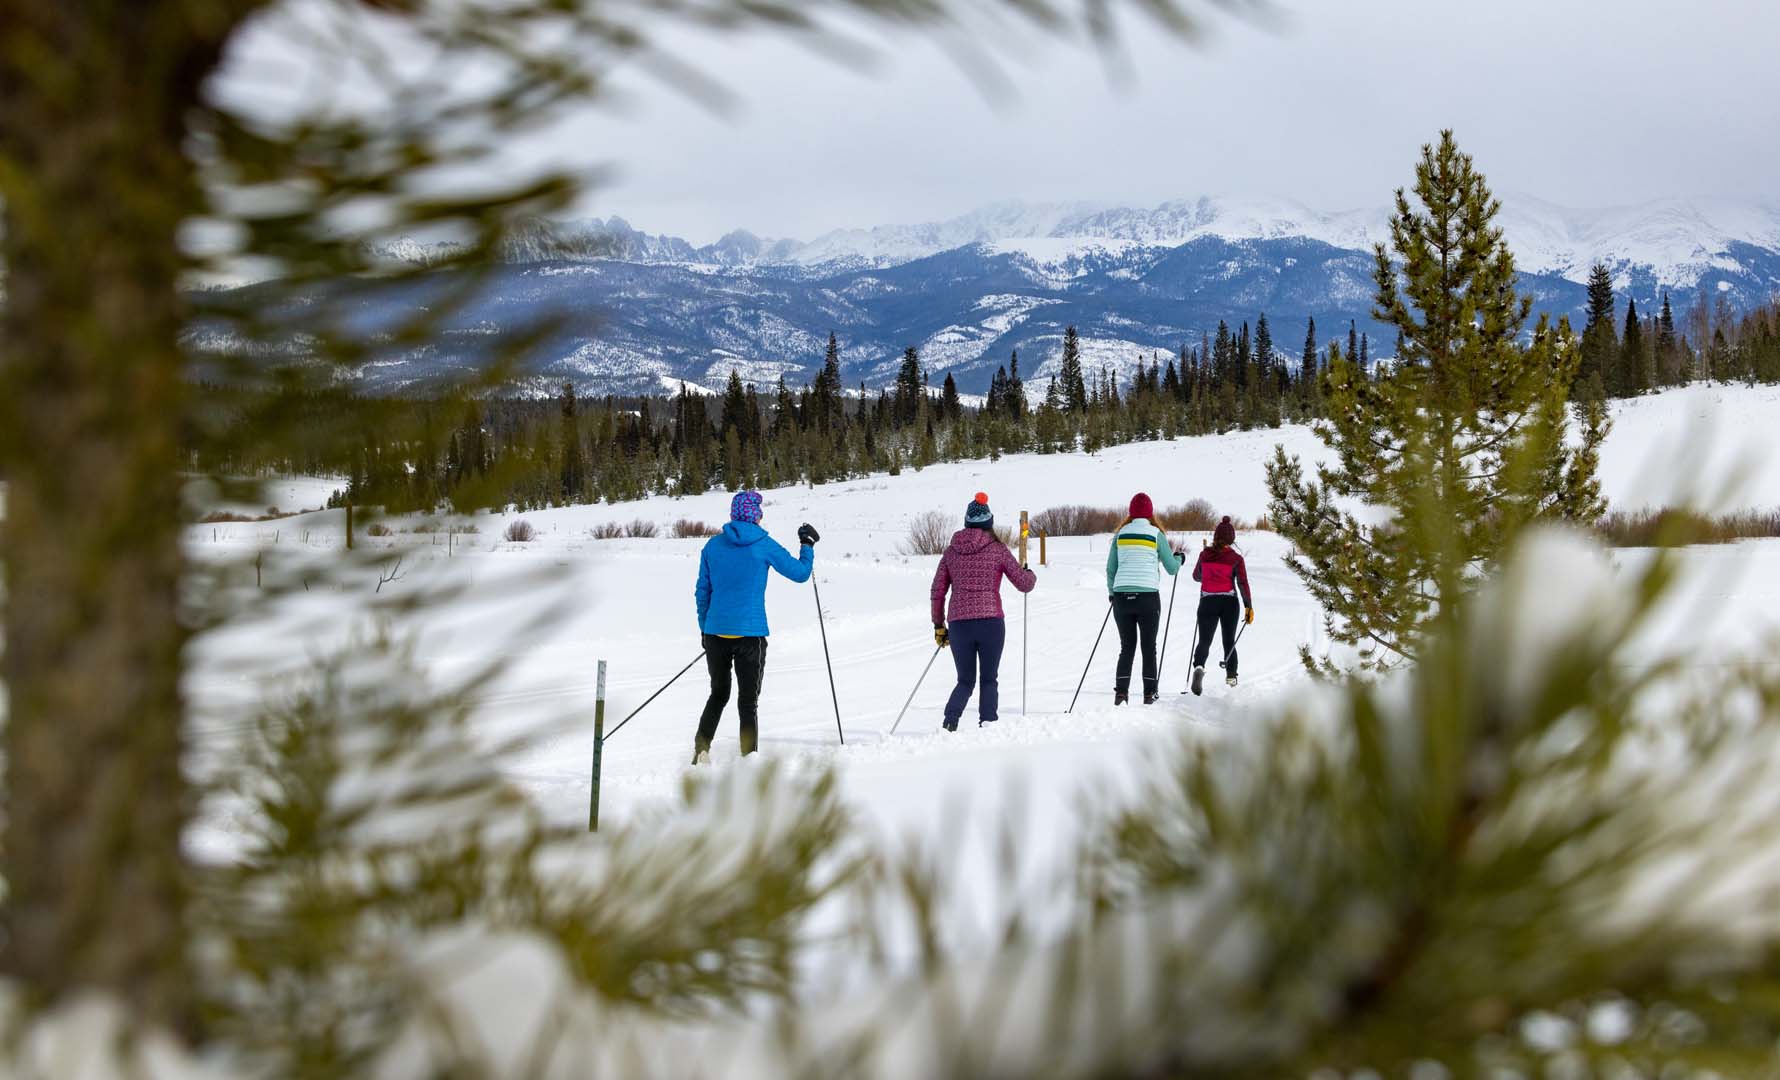 Four people cross country skiing with trees and mountains surrounding